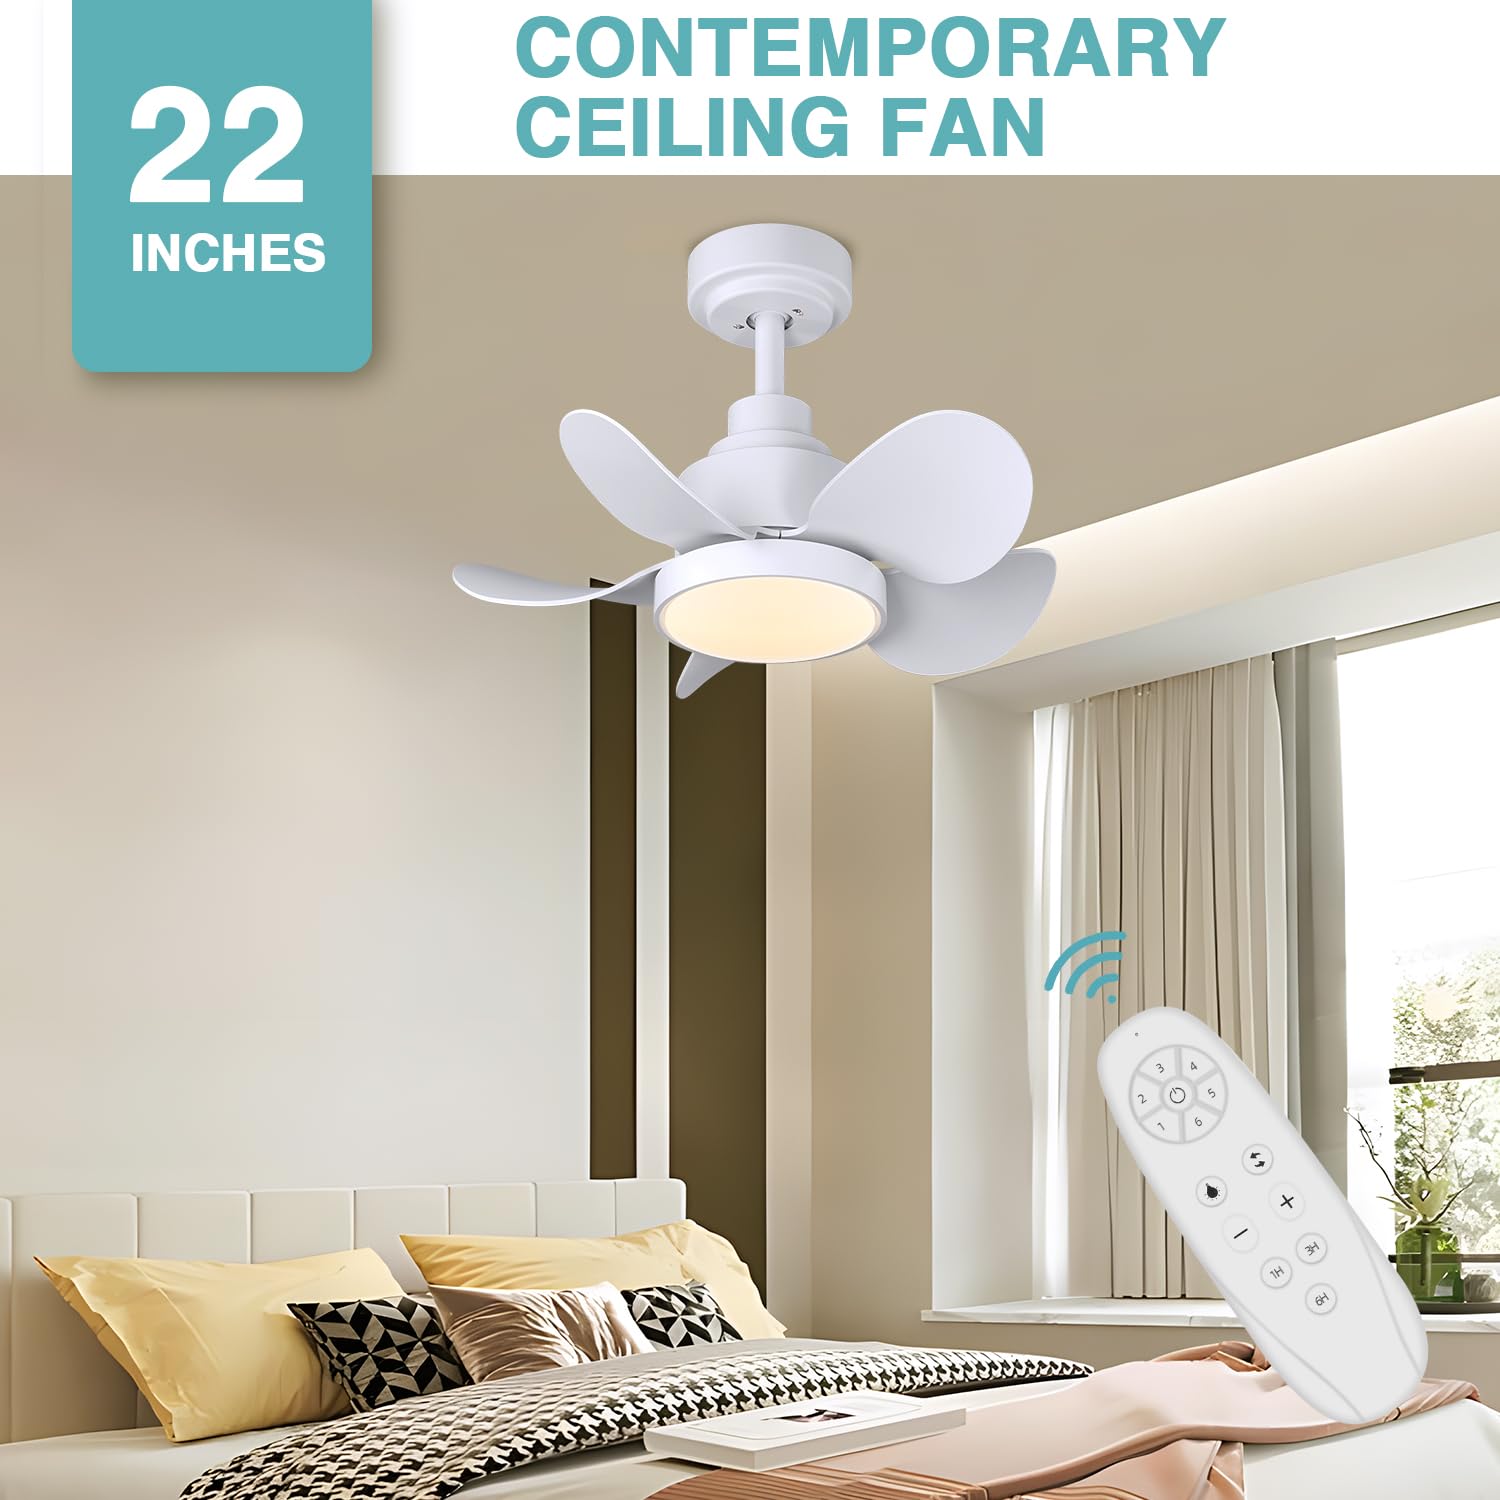 CJOY 22 inch Ceiling Fan with Lights, Small White Fan with Remote, LED Light, DC Quiet Motor, 5 Reversible Blades Ceiling Fans for Bedroom/Living Room/Small Space